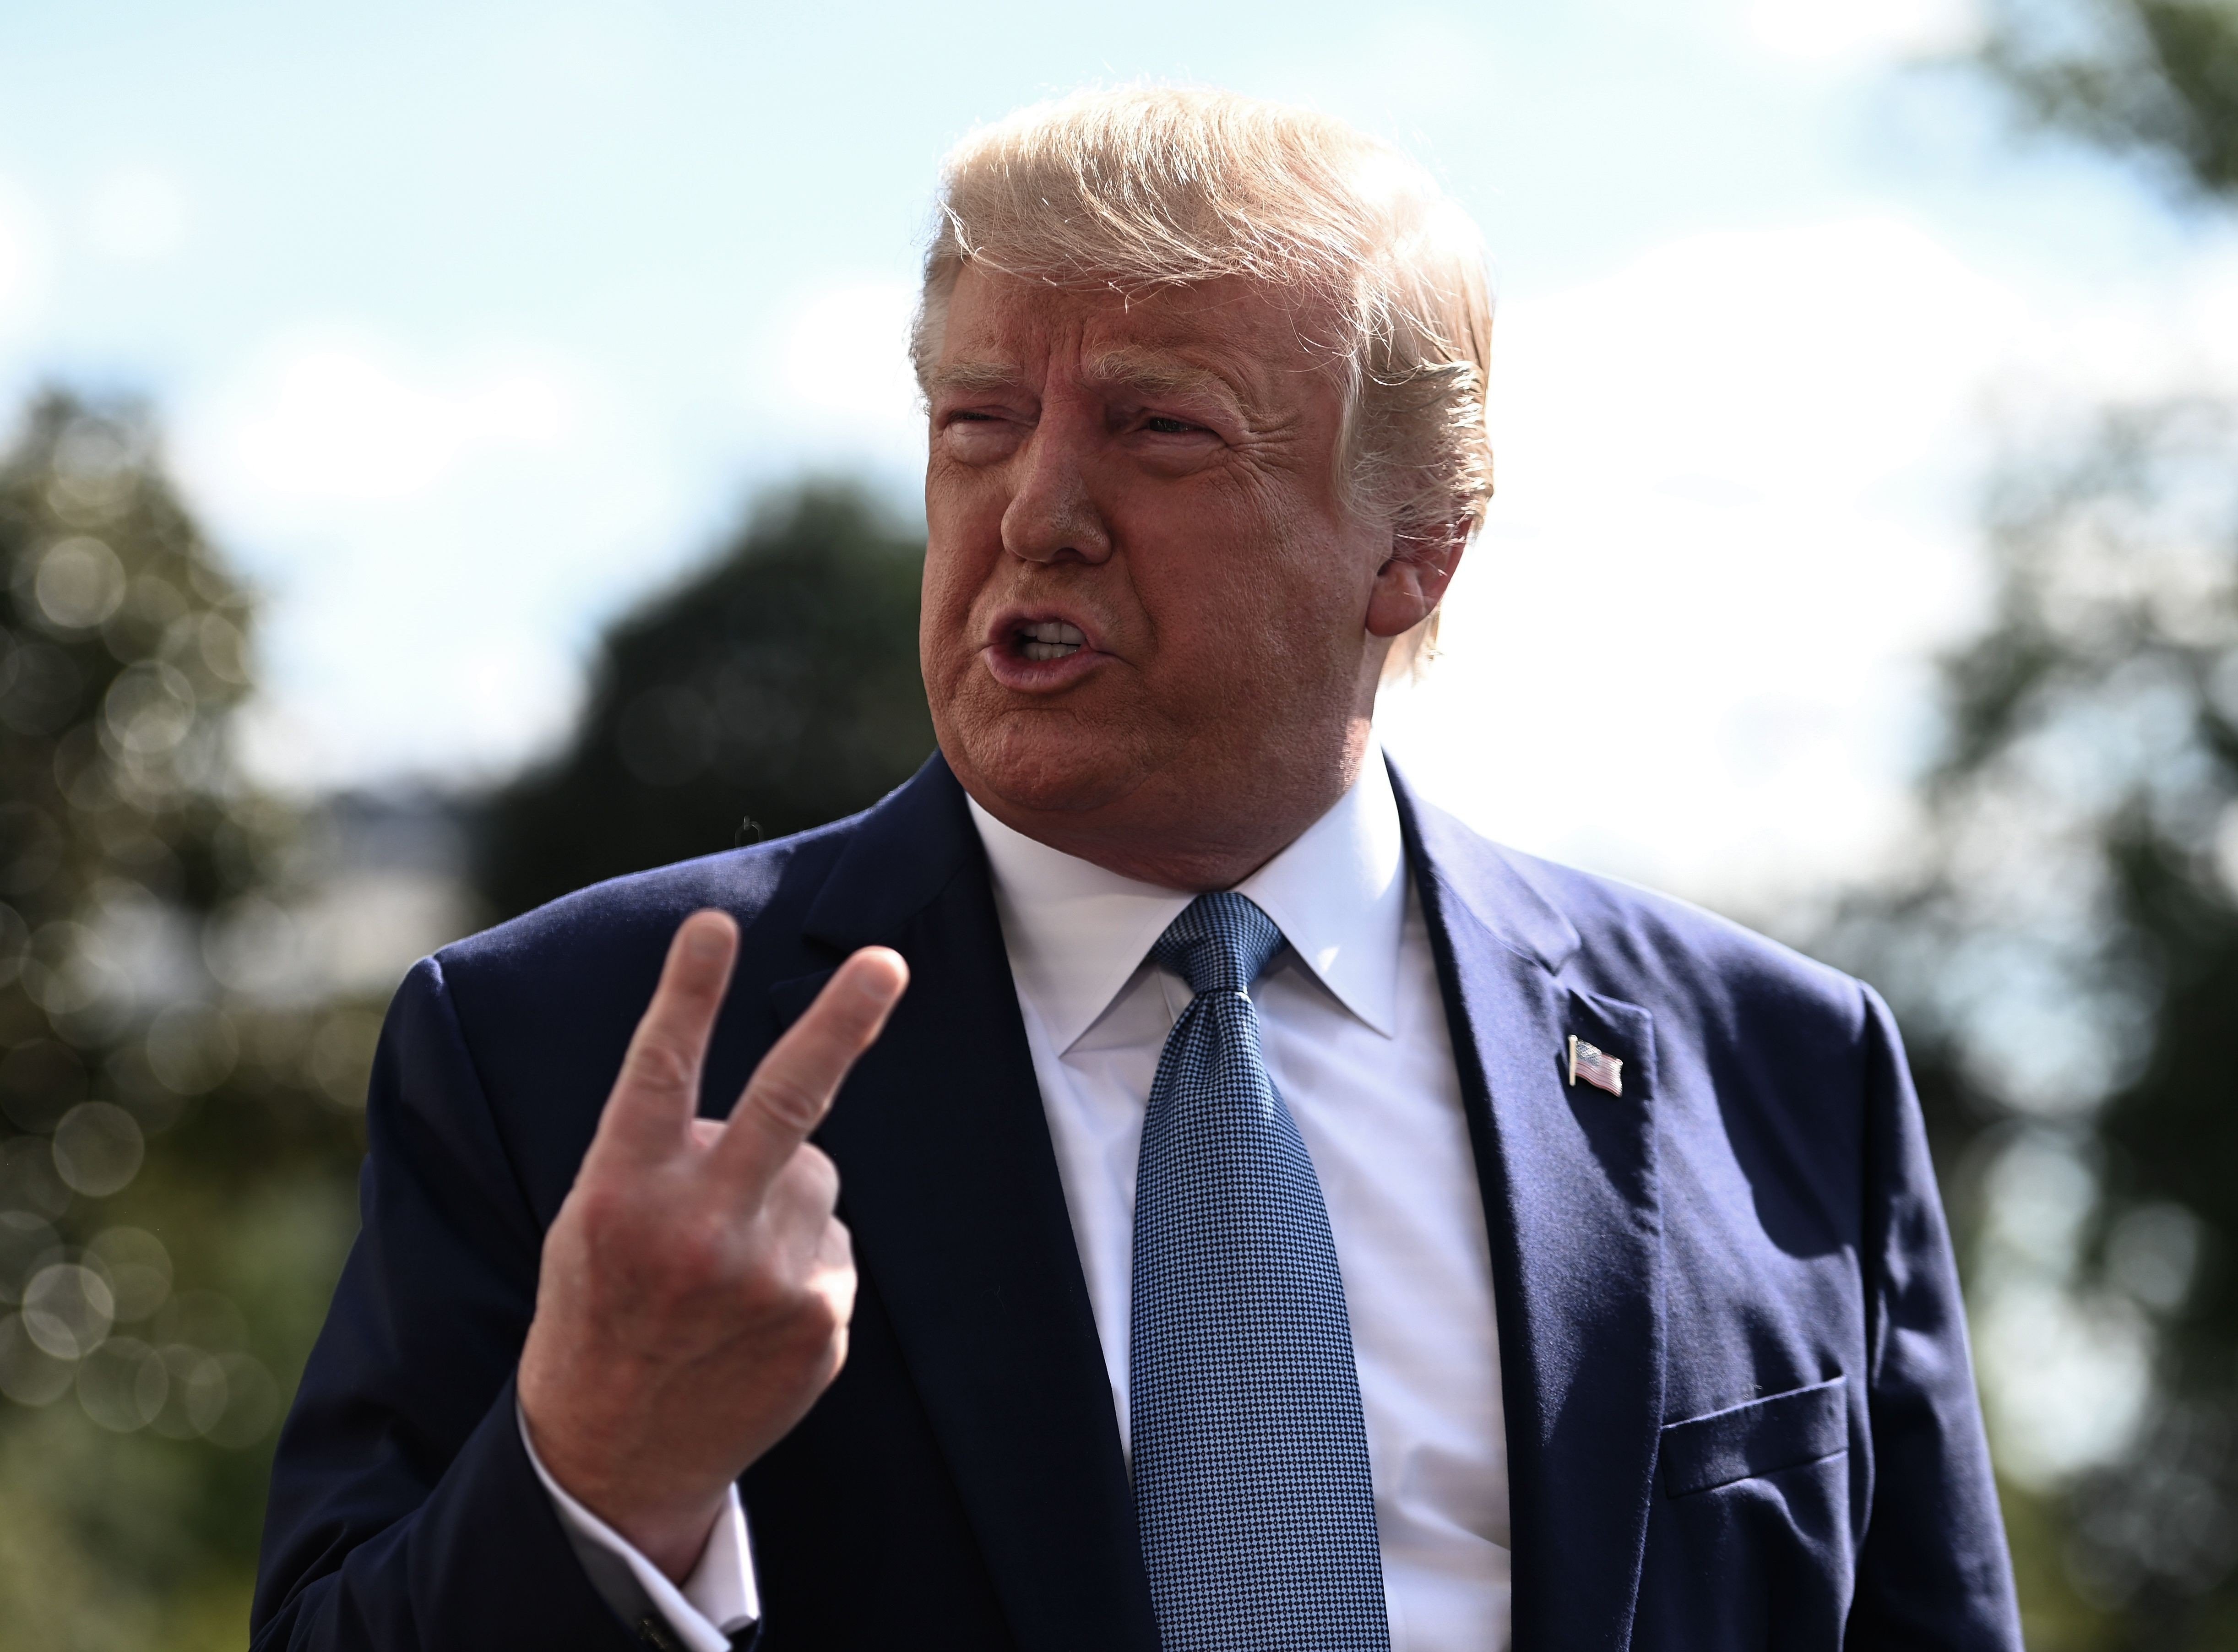 Embattled US President Donald Trump is lashing out at Democrat rival Joe Biden, and China has rejected Trump’s call to investigate Biden’s family’s business affairs. Photo: AFP